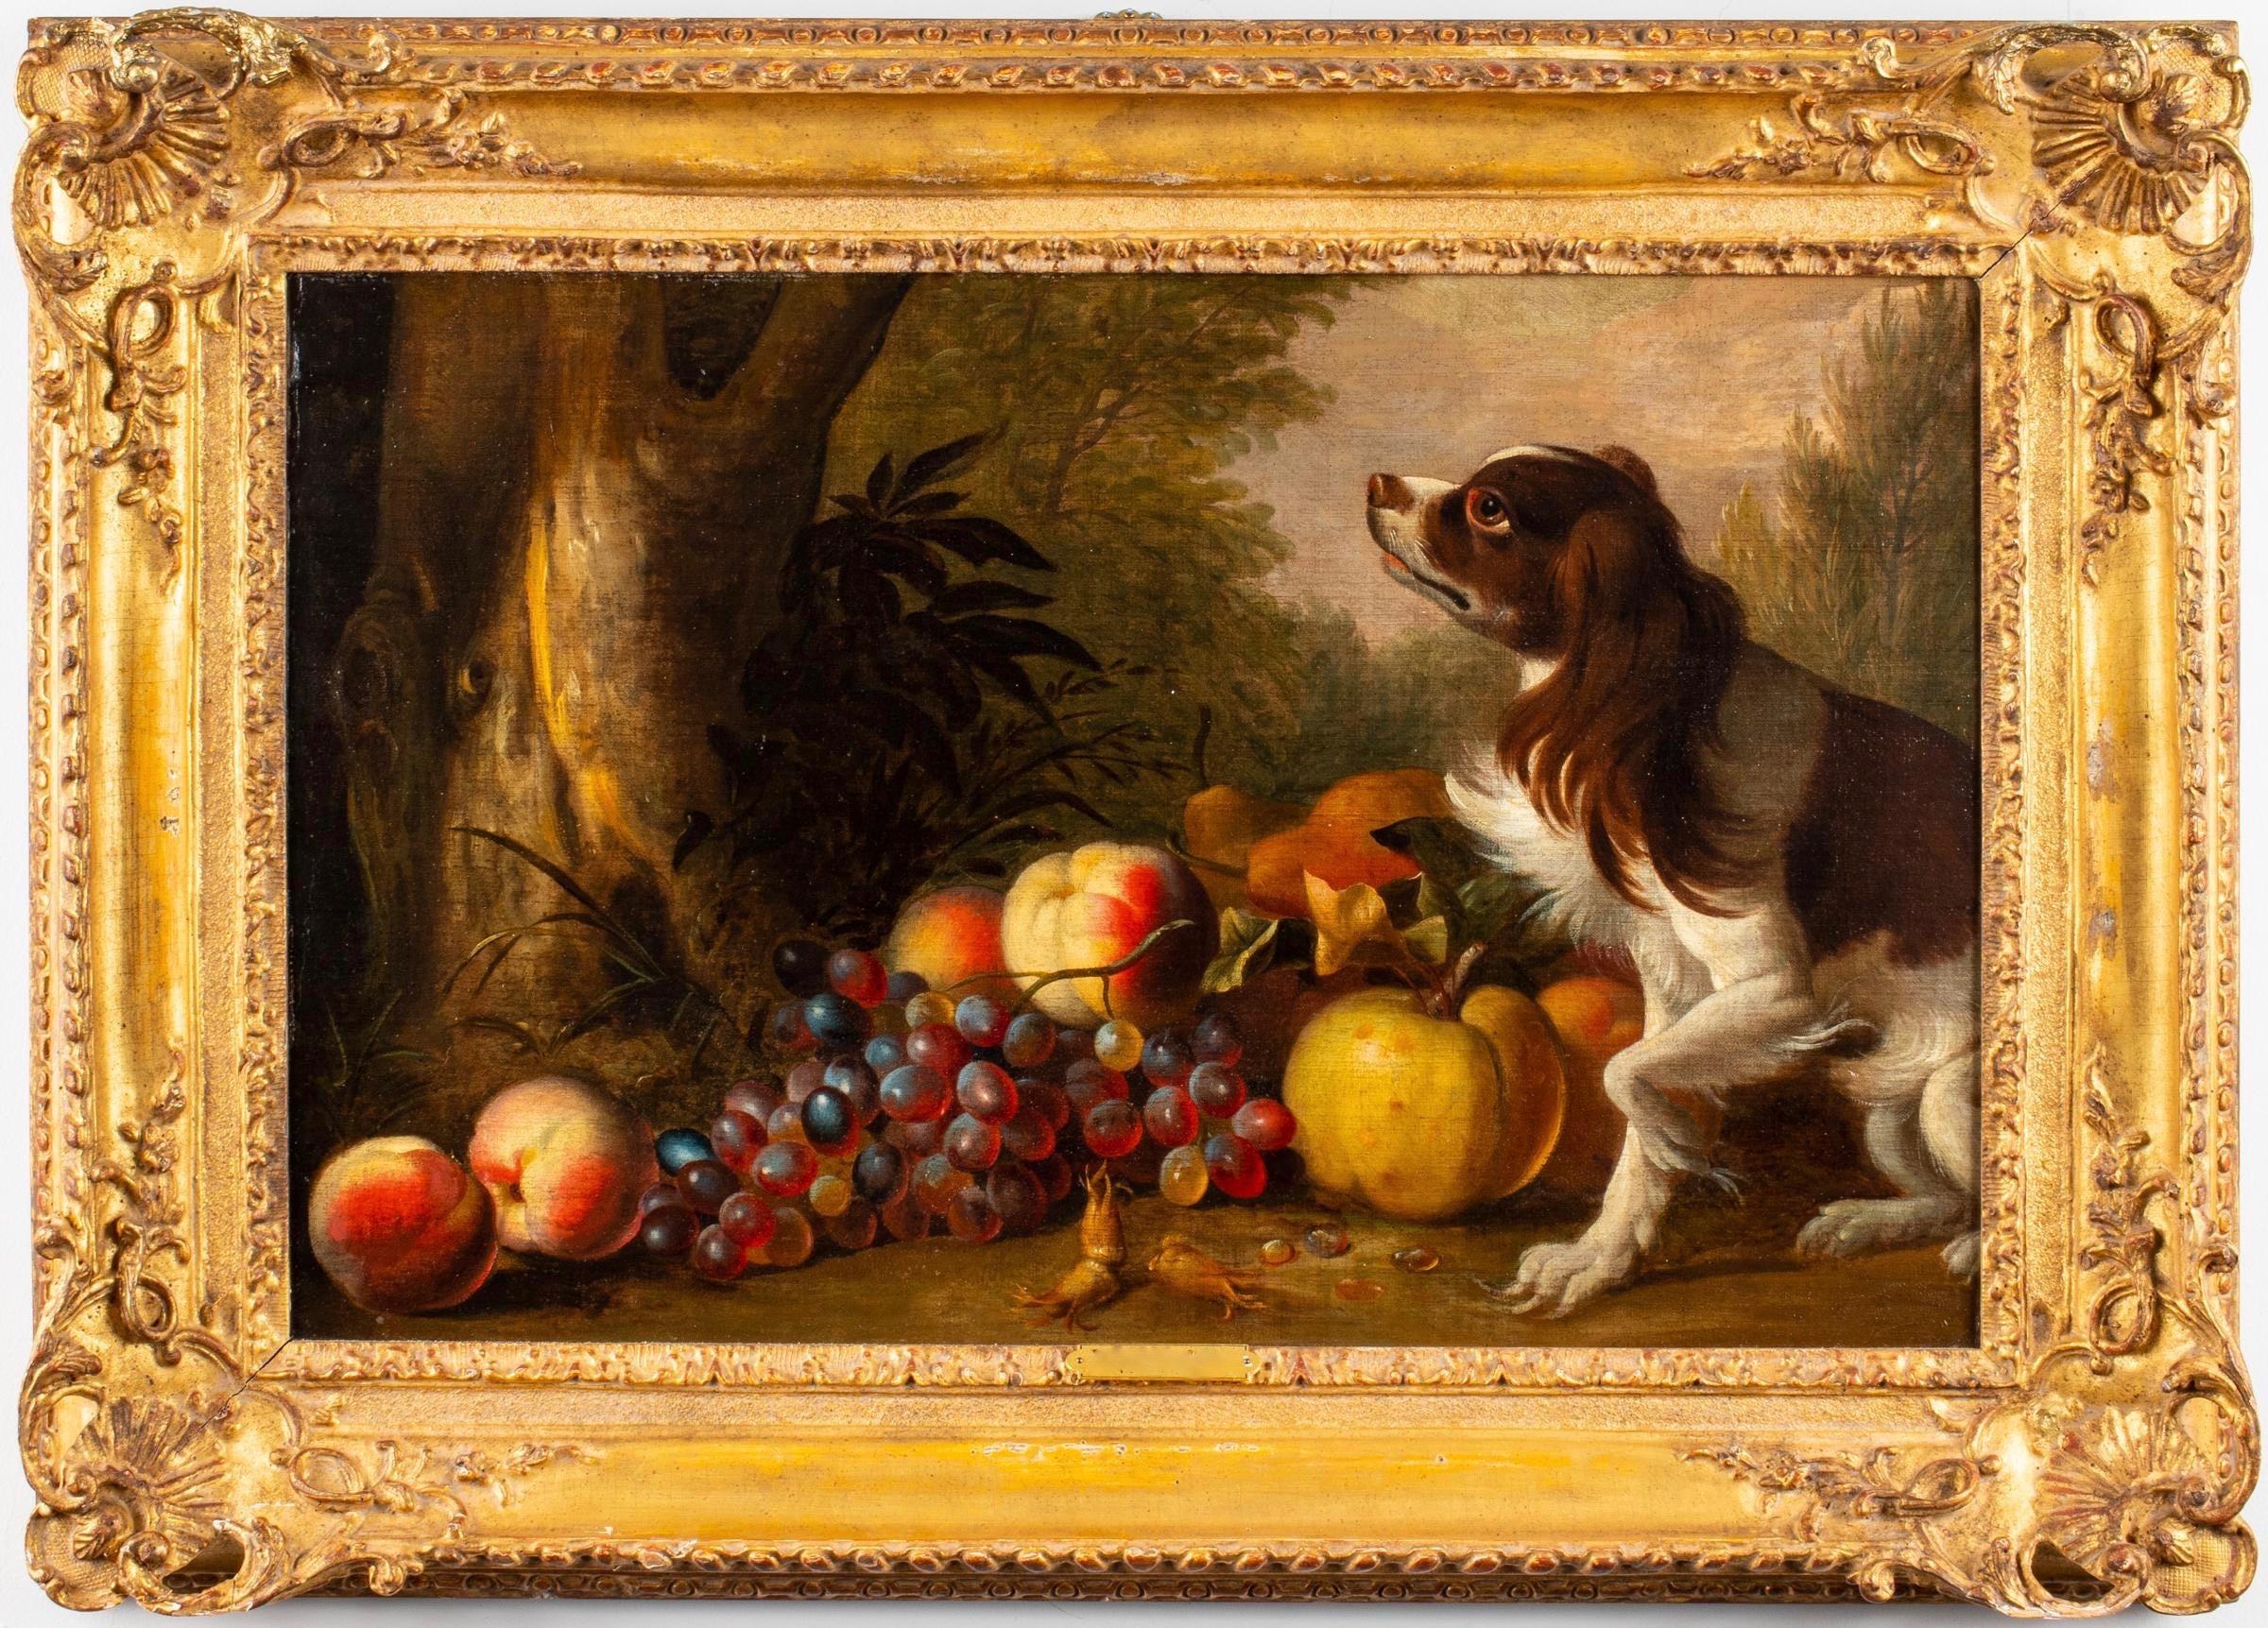 17th century portrait of a Spaniel dog with fruit in a wooded landscape.